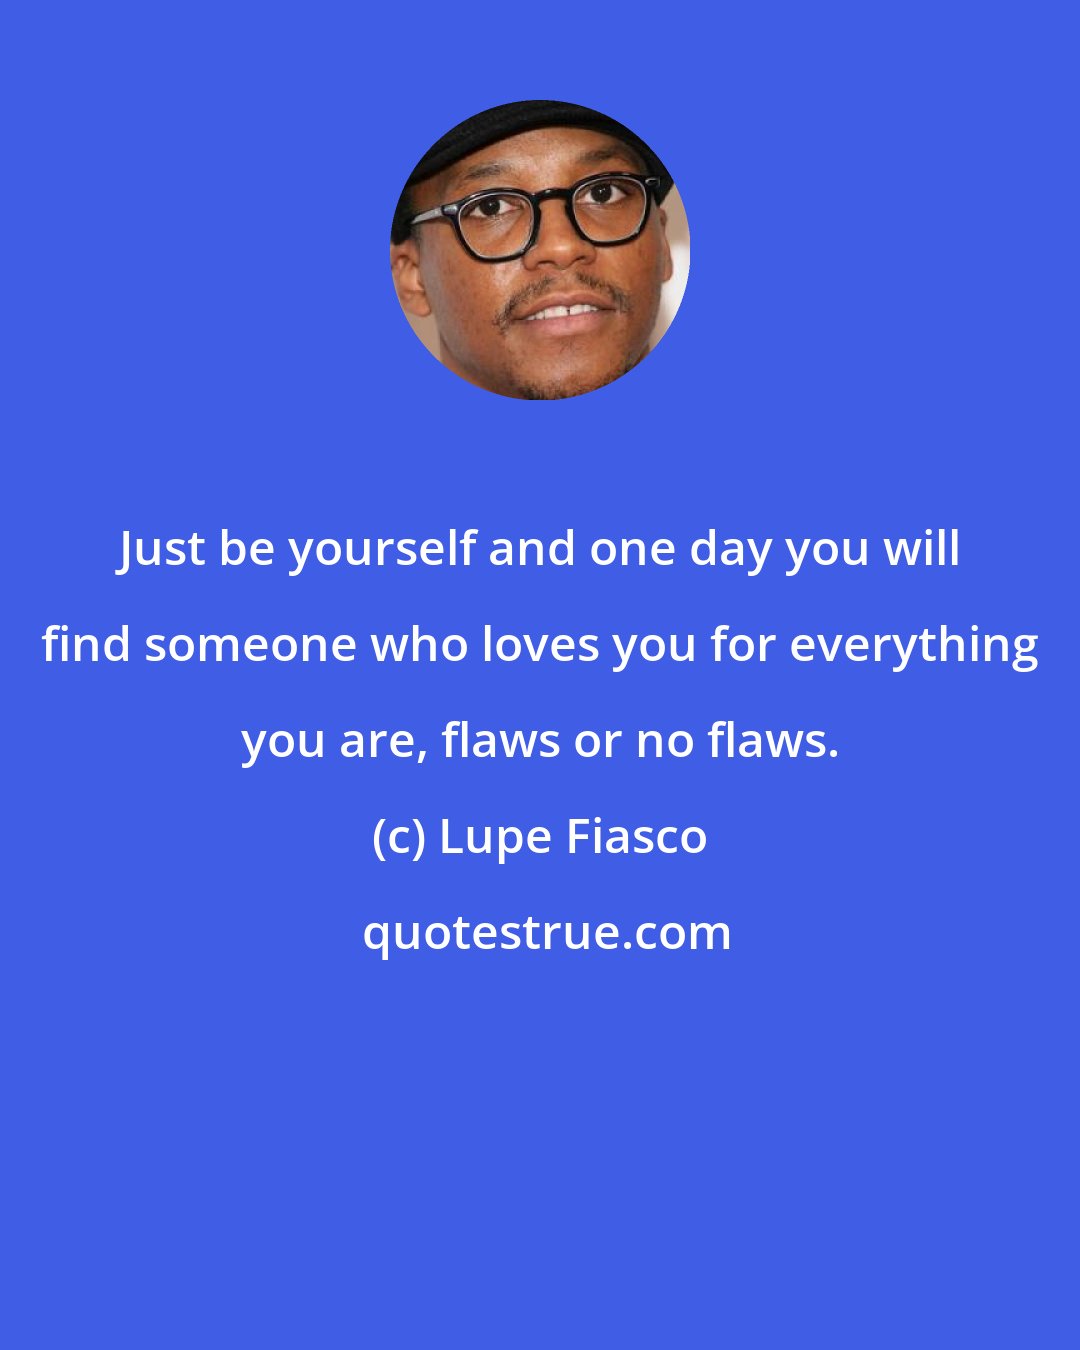 Lupe Fiasco: Just be yourself and one day you will find someone who loves you for everything you are, flaws or no flaws.